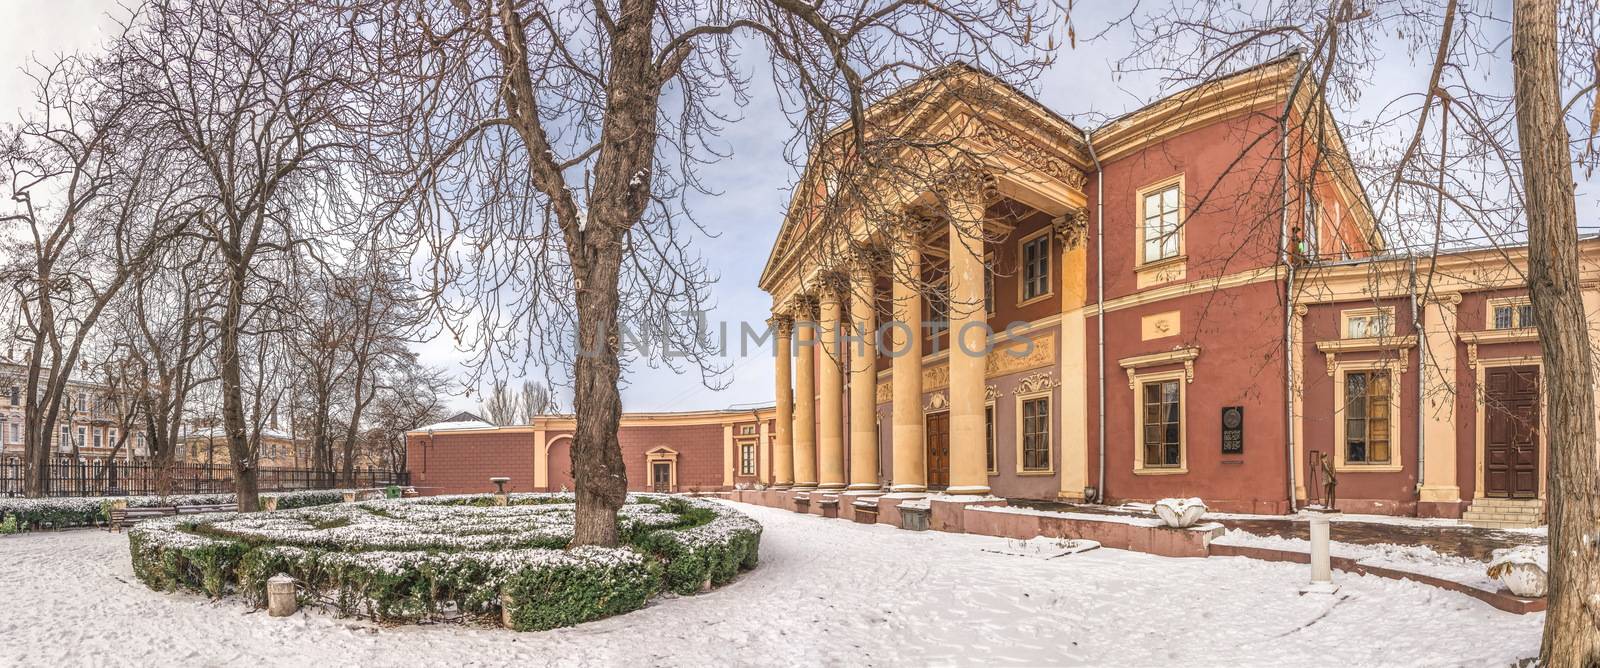 Odessa Art Museum and picture gallery in Ukraine by Multipedia